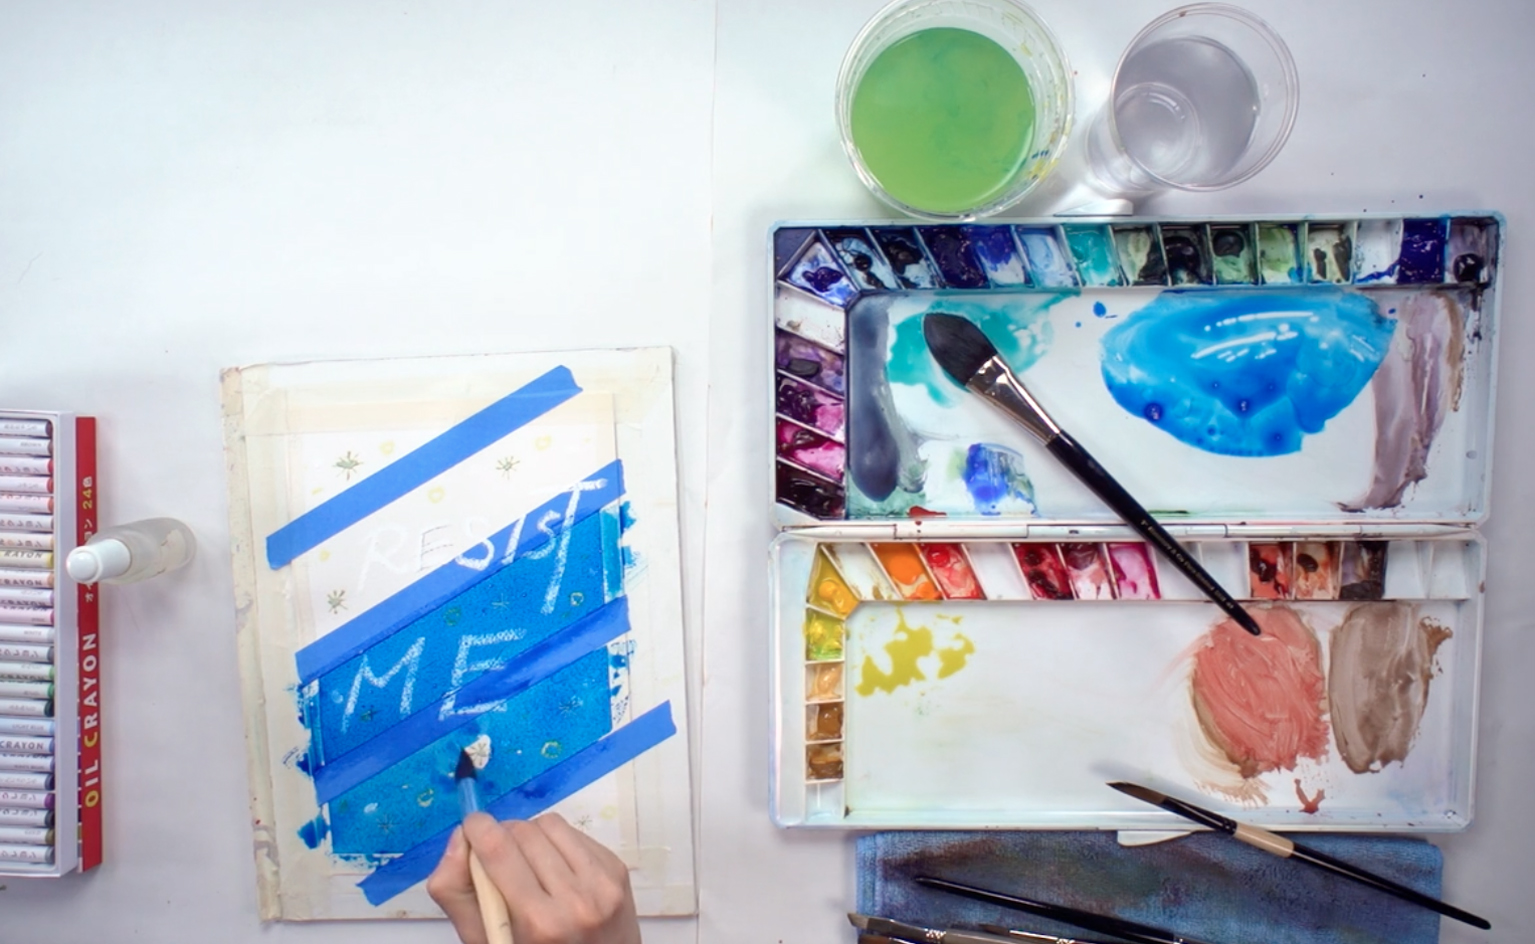 How to Do Watercolor Crayon Resist on Canvas